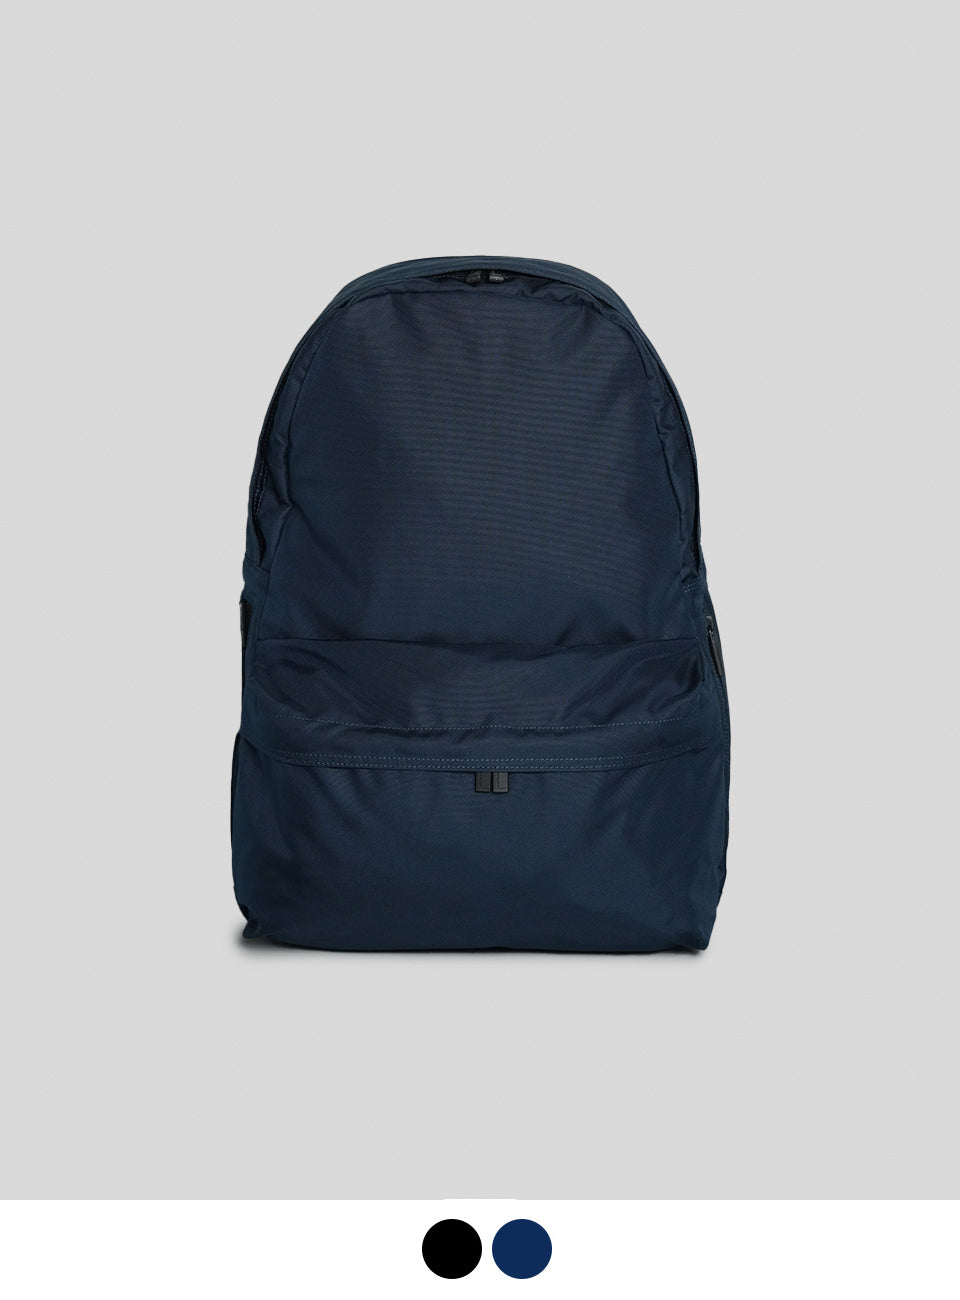 MONOLITH モノリス BACKPACK STANDARD S バックパック スタンダード S 